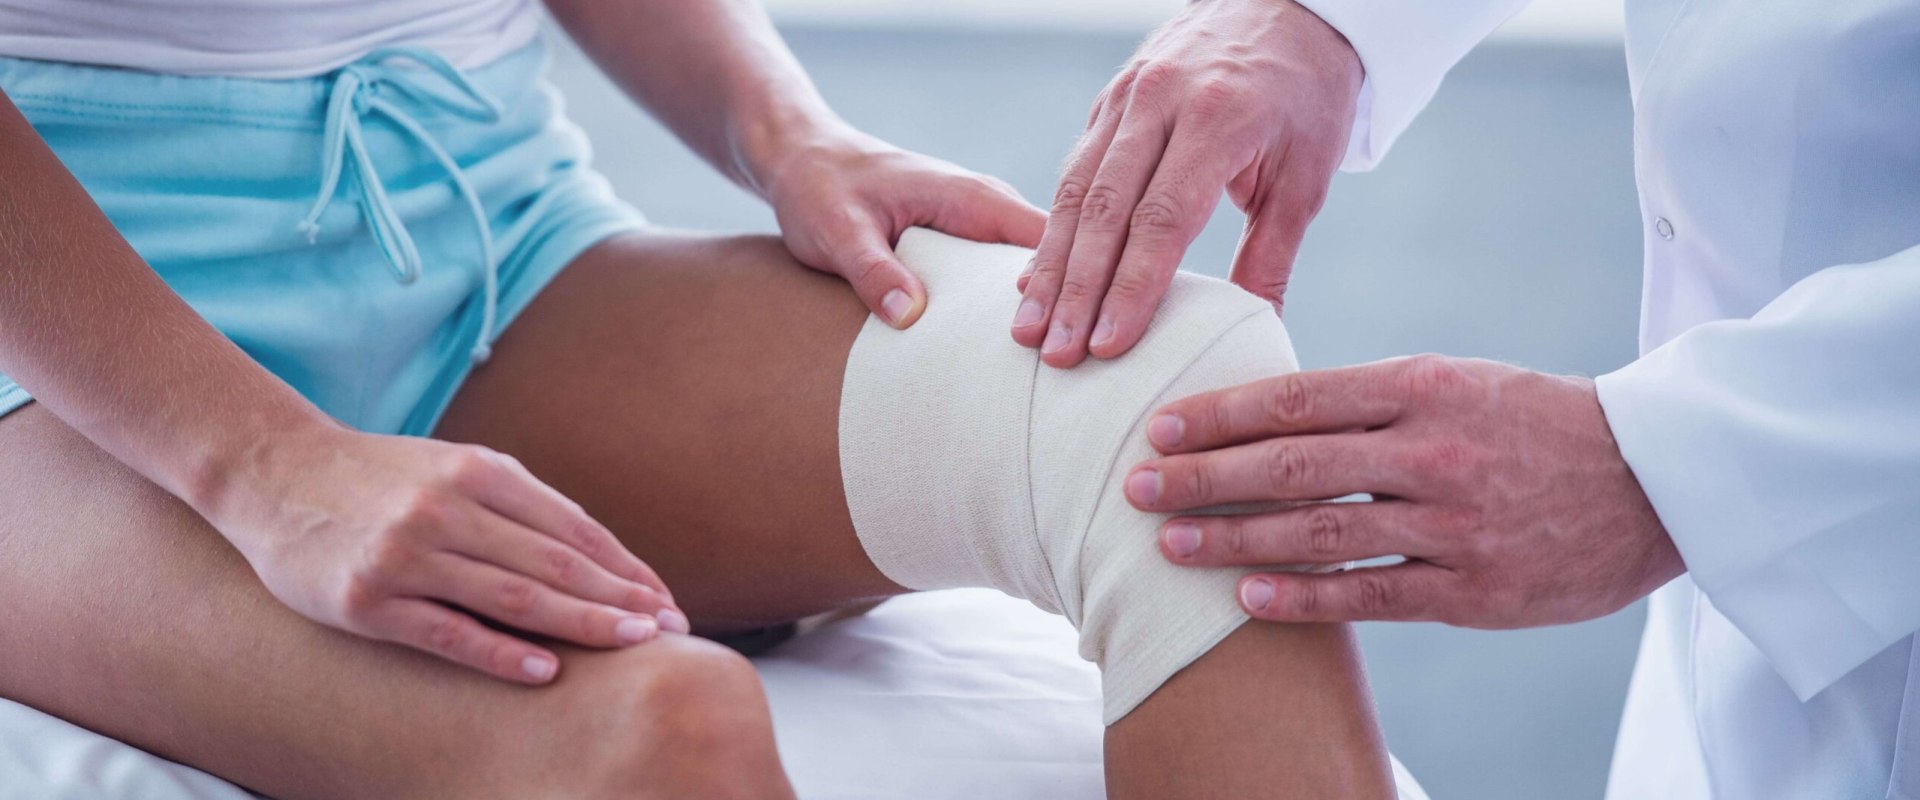 The Importance of a Multidisciplinary Approach in Wound Care